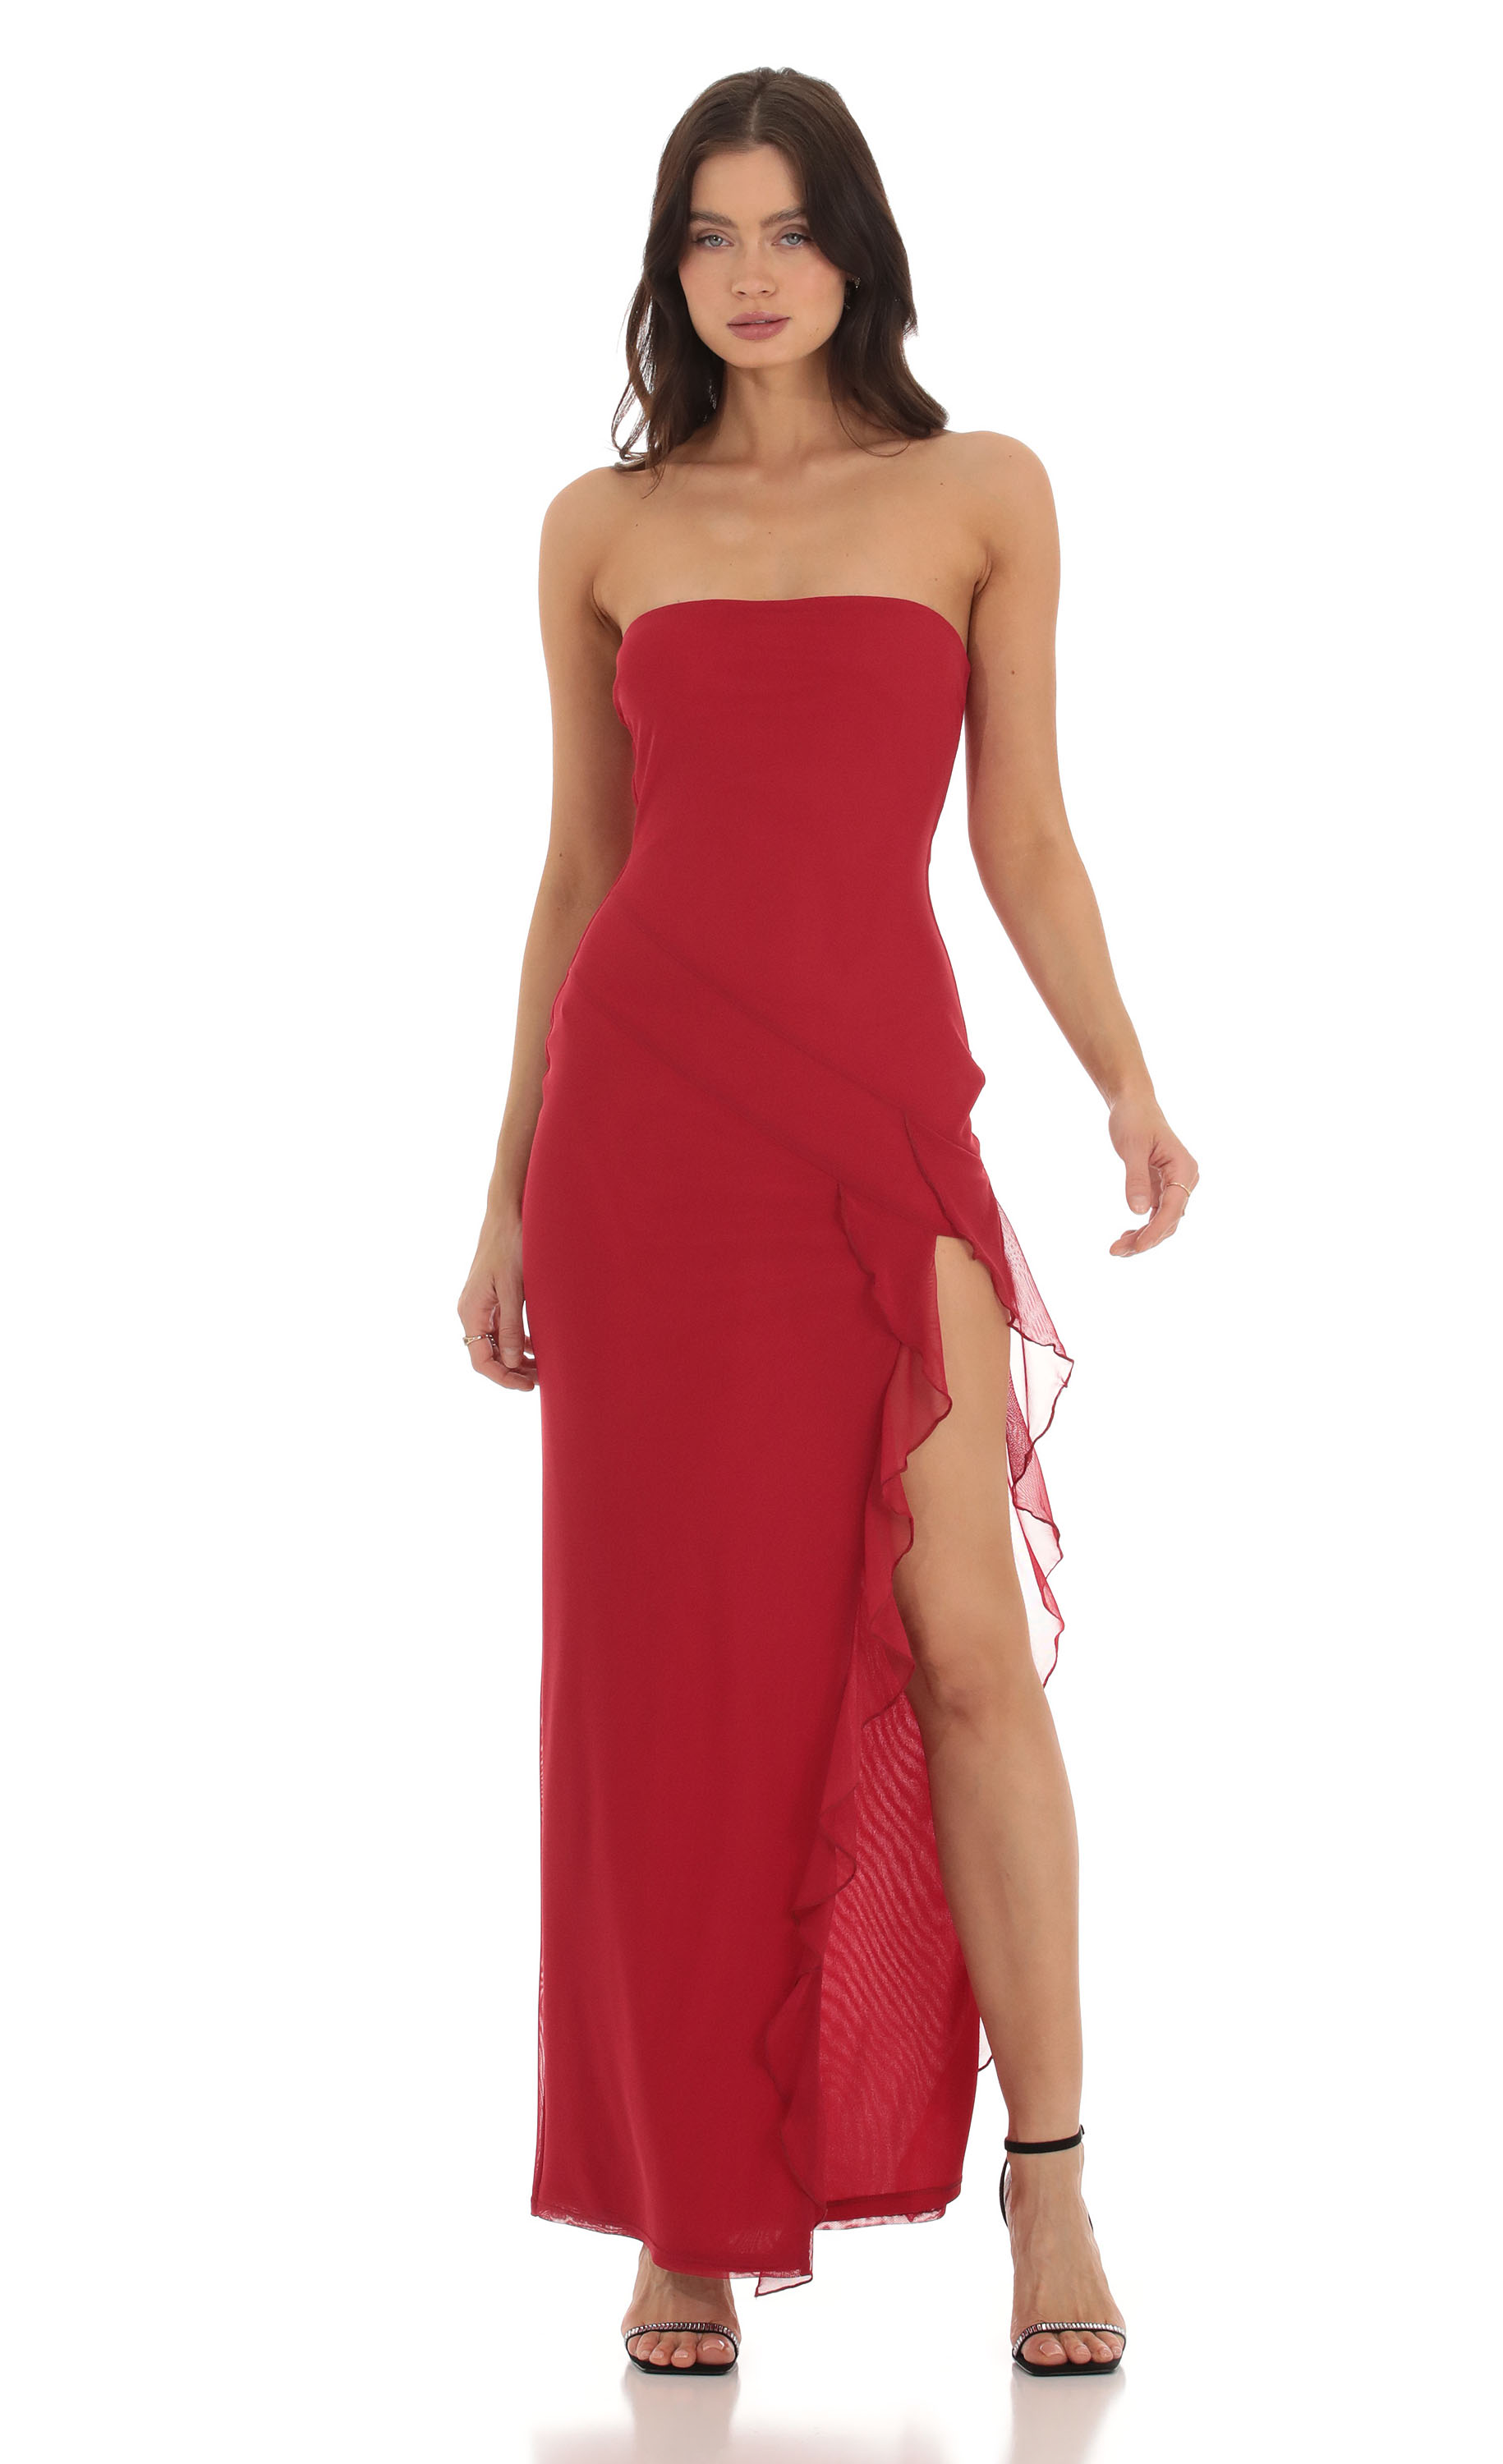 Begin the Party Red Strapless Plunge Skater Dress